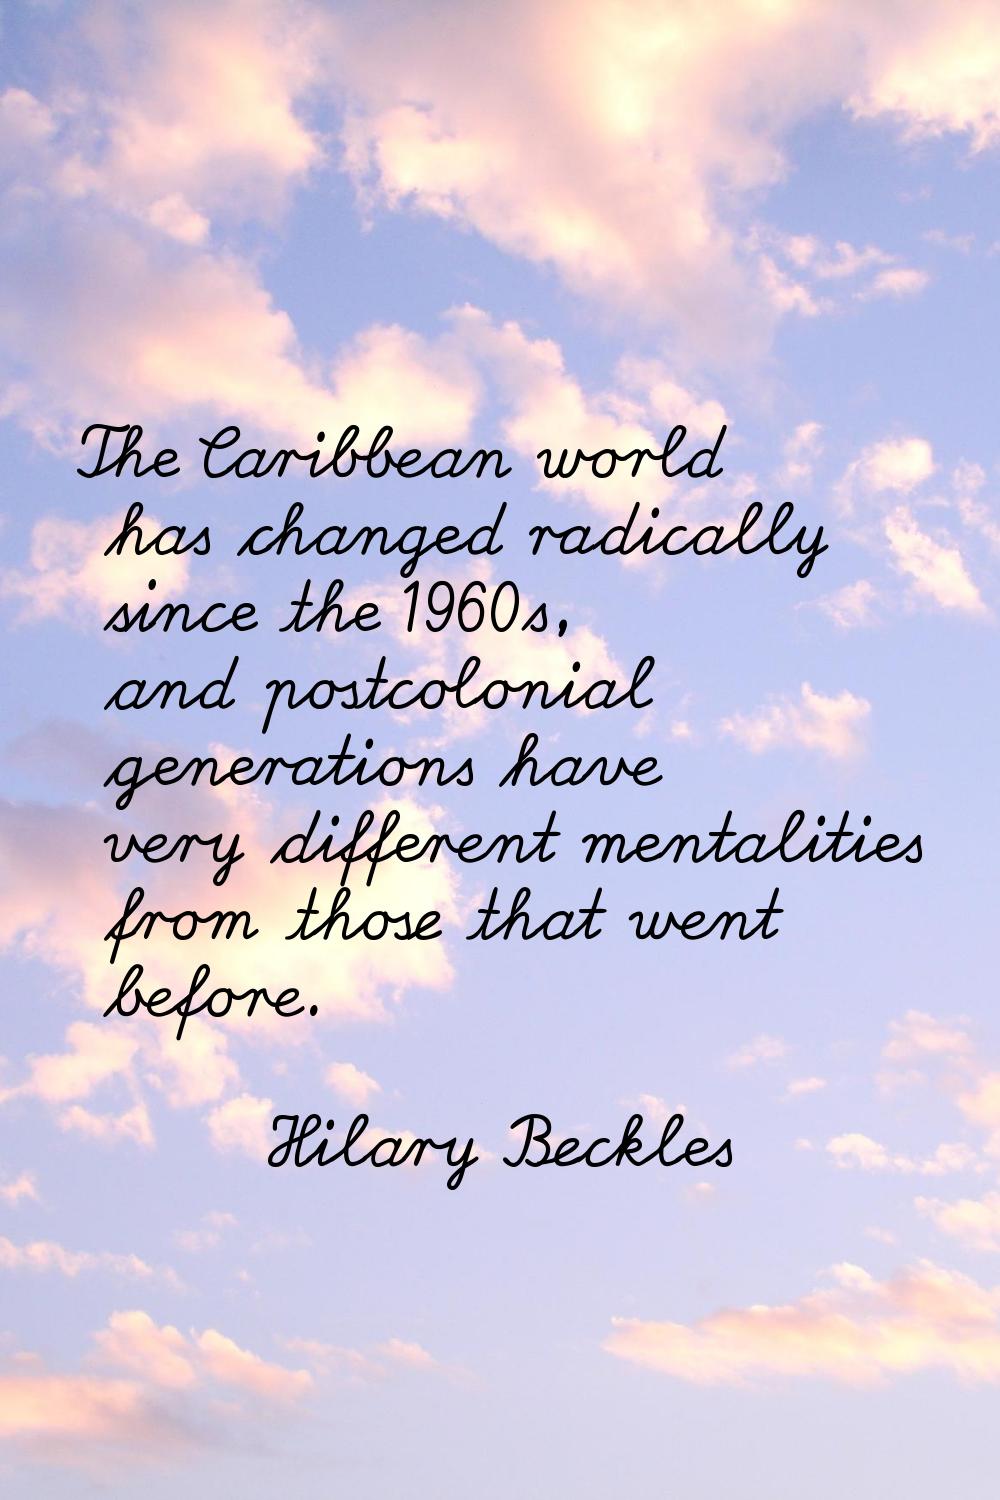 The Caribbean world has changed radically since the 1960s, and postcolonial generations have very d